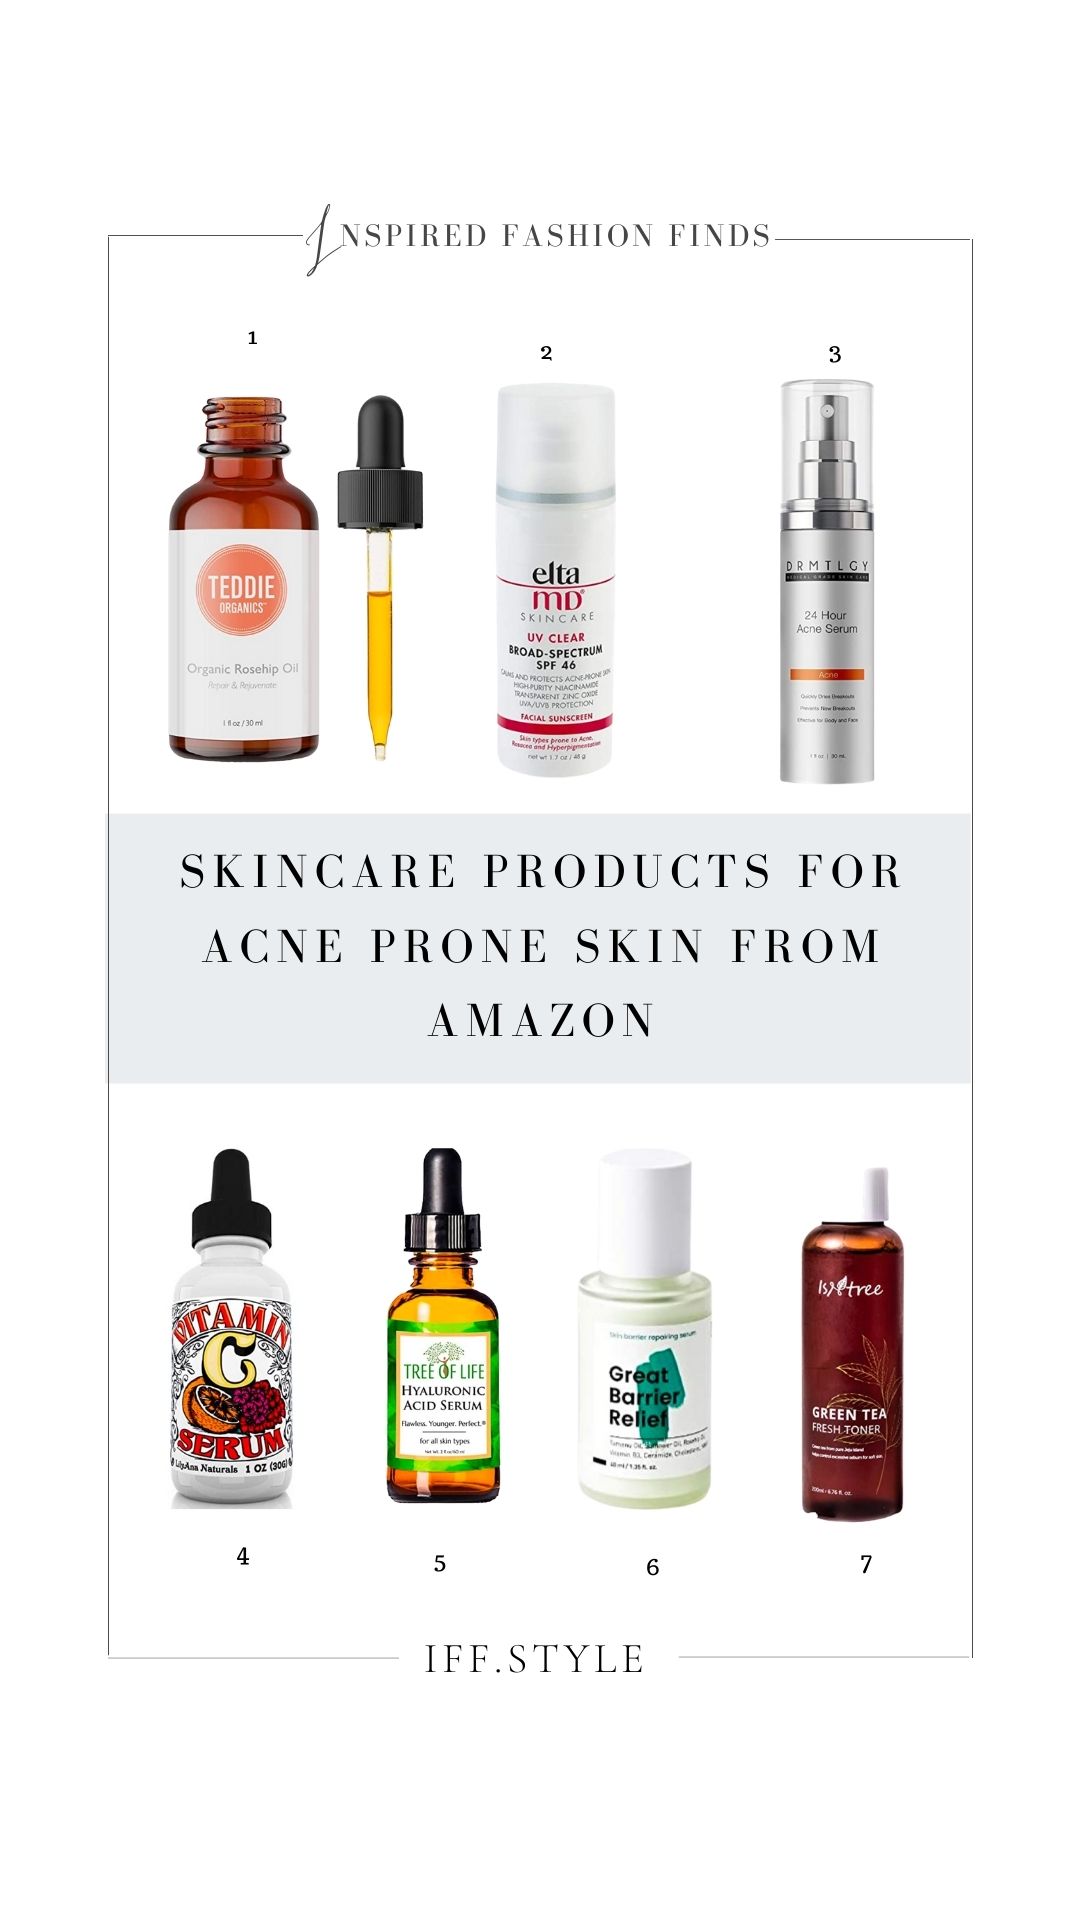 Lifestyle-Beauty-Skincare items for Acne prone skin from Amazon